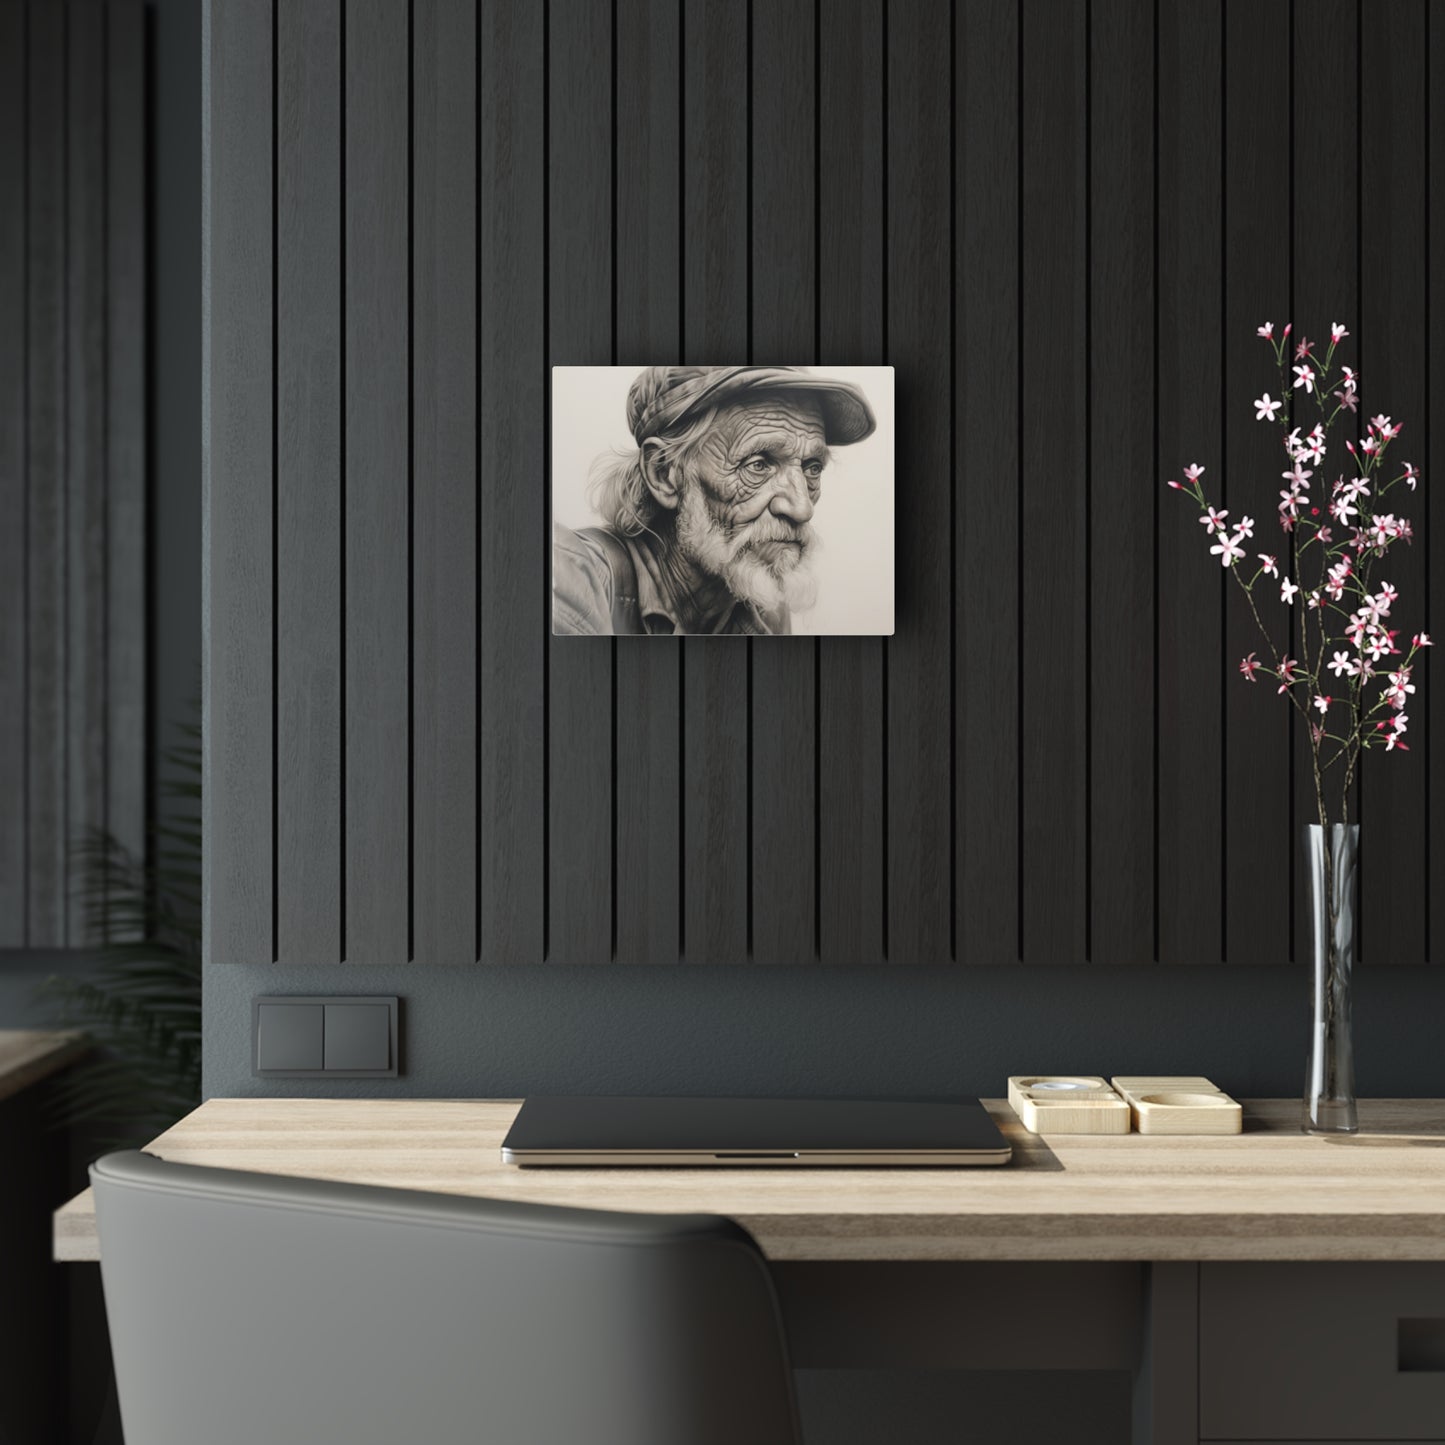 Gramps with a Cap - Acrylic Prints